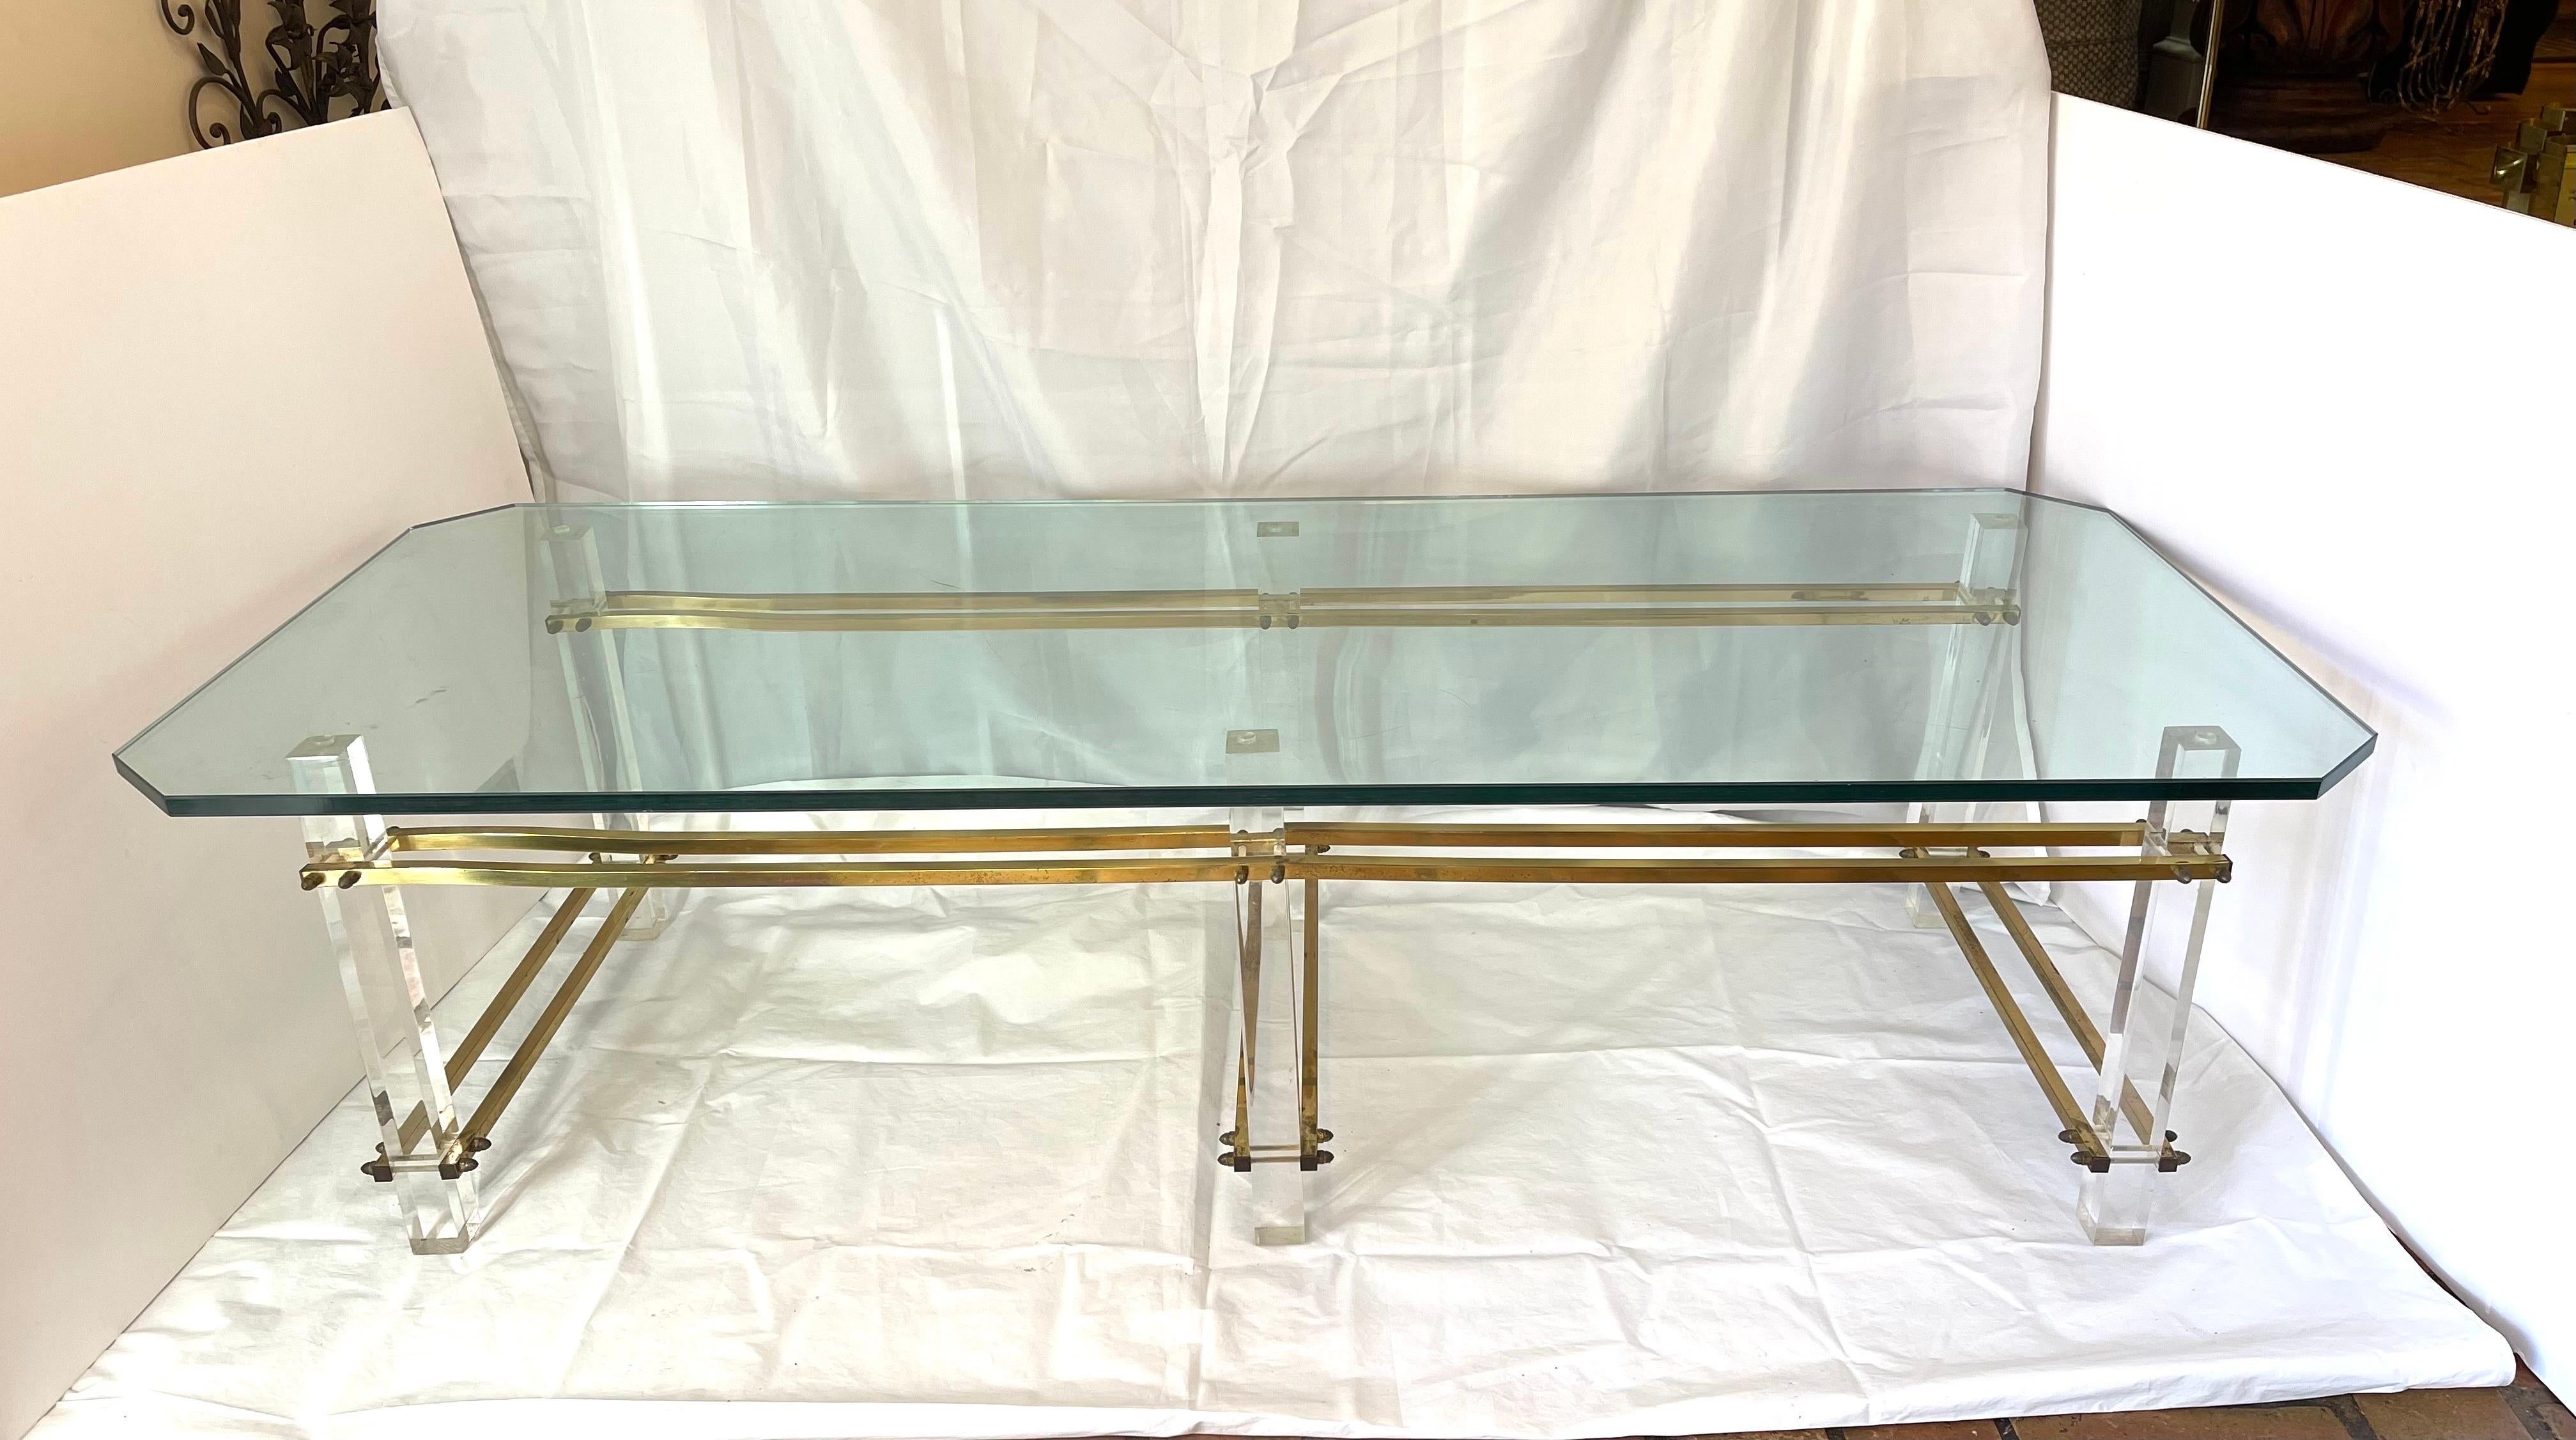 Stunning Charles Hollis Jones Lucite, brass and glass coffee table. Thick rectangular glass top with corner cut  edges. This sleek Hollywood Regency style table is the epitome of glam and will dress up any living room or office. The glass top is